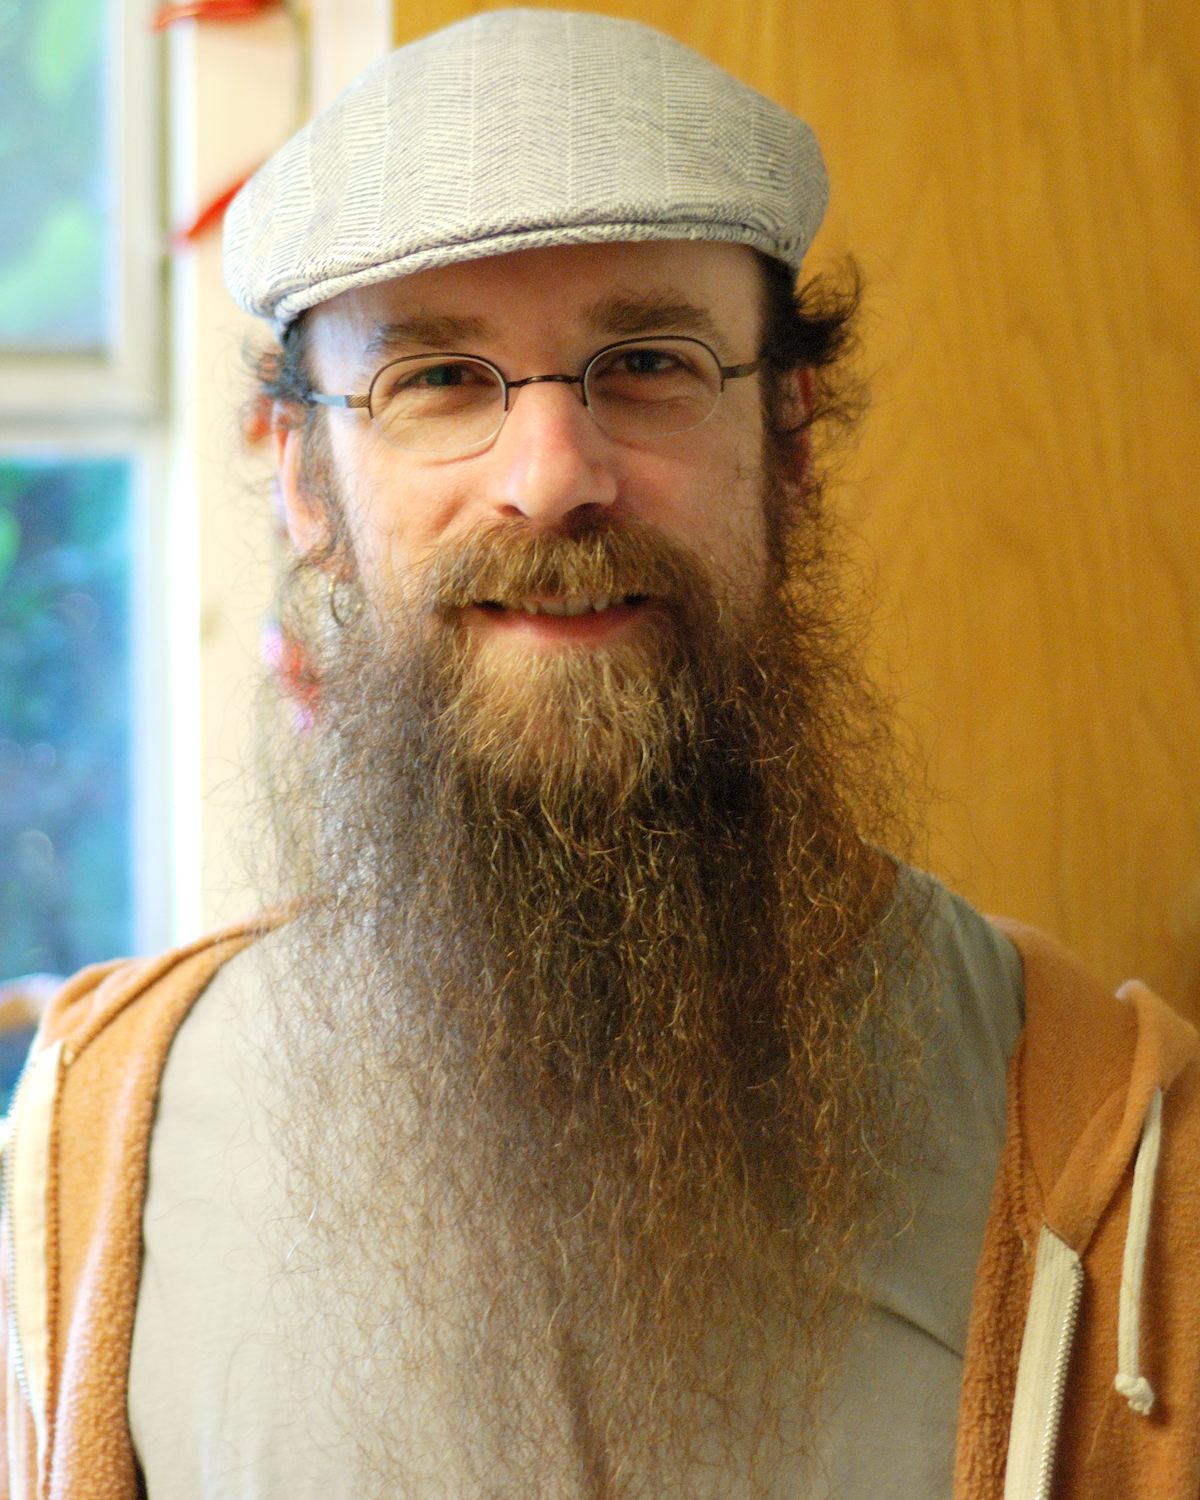 a bearded man with glasses and a cap on